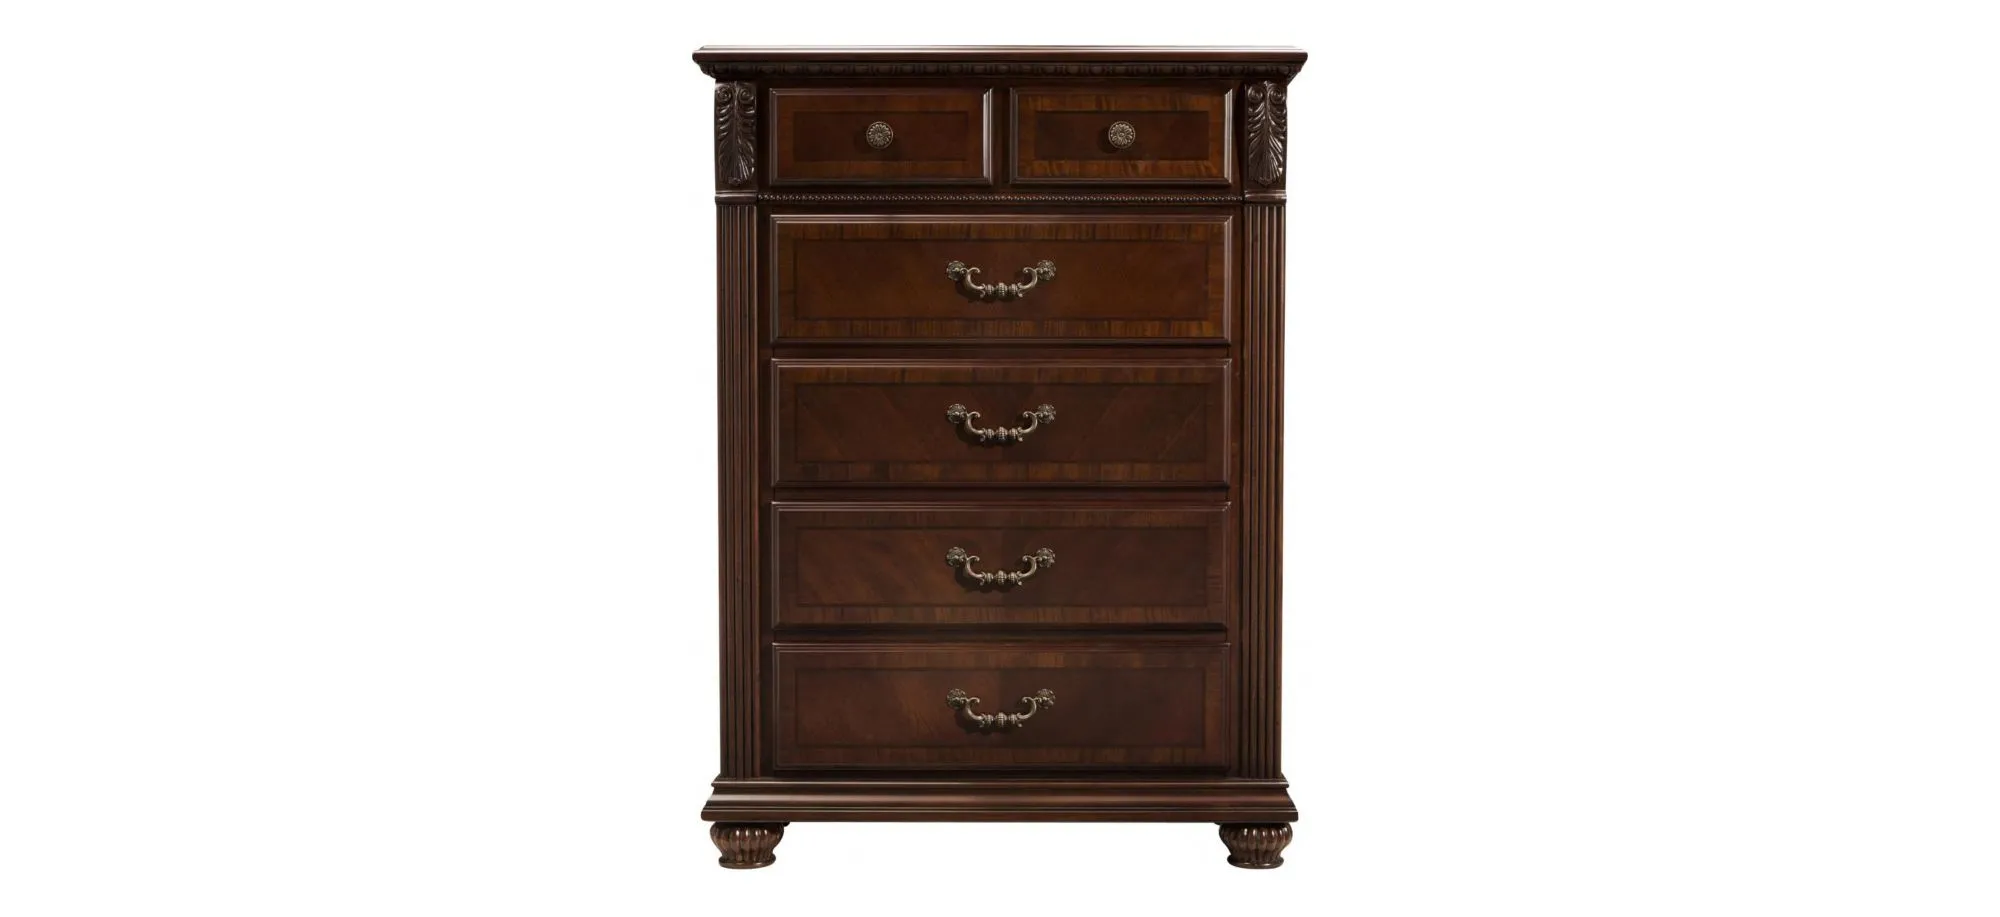 Ashbury Bedroom Chest in Cherry by Bellanest